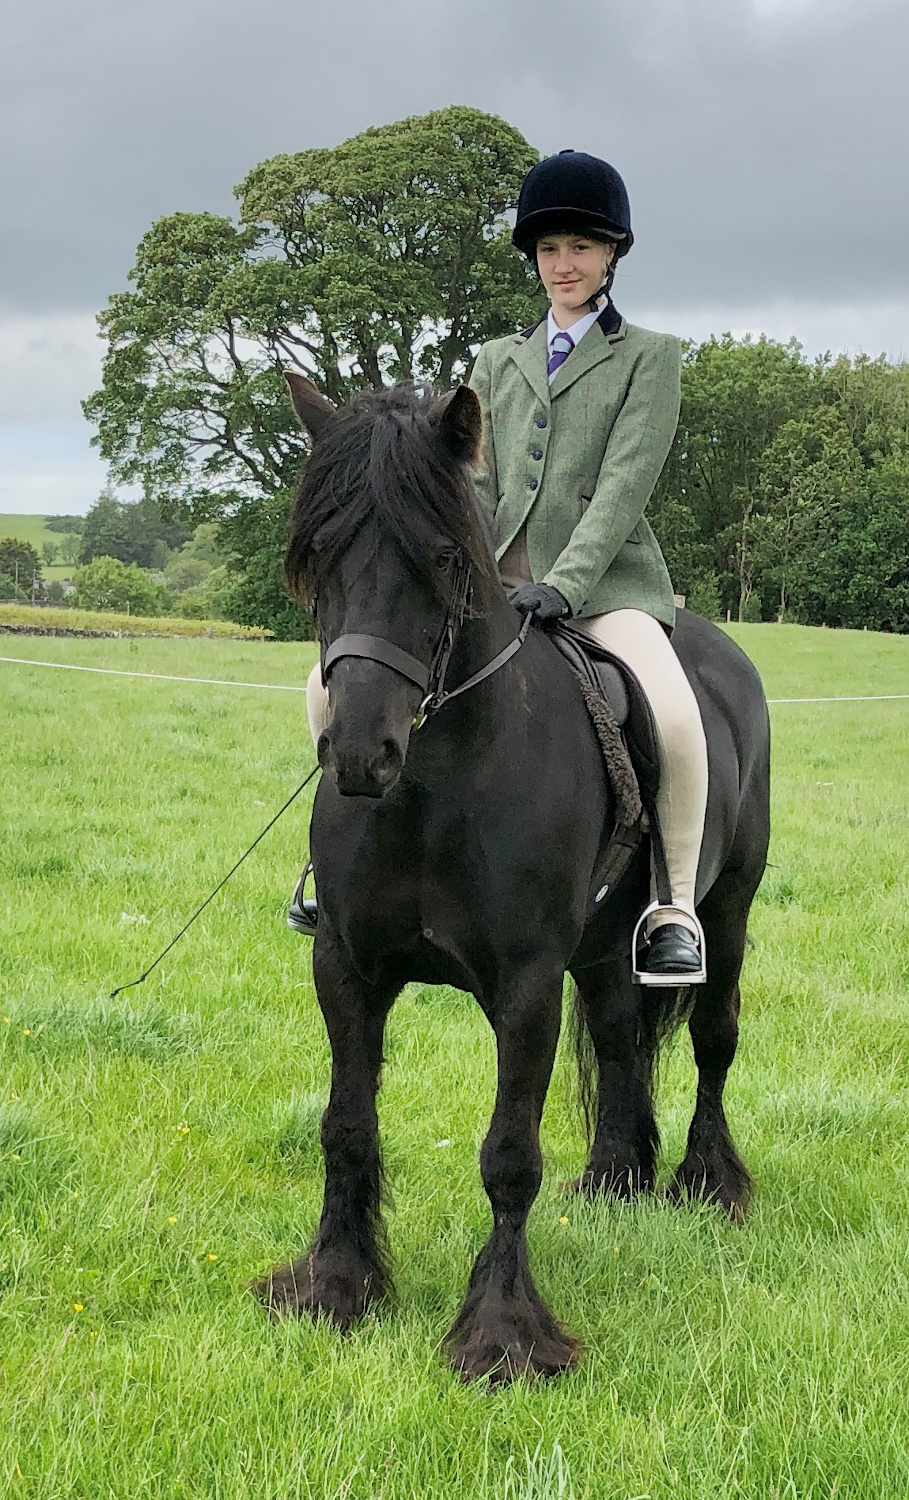 pony and rider in a field